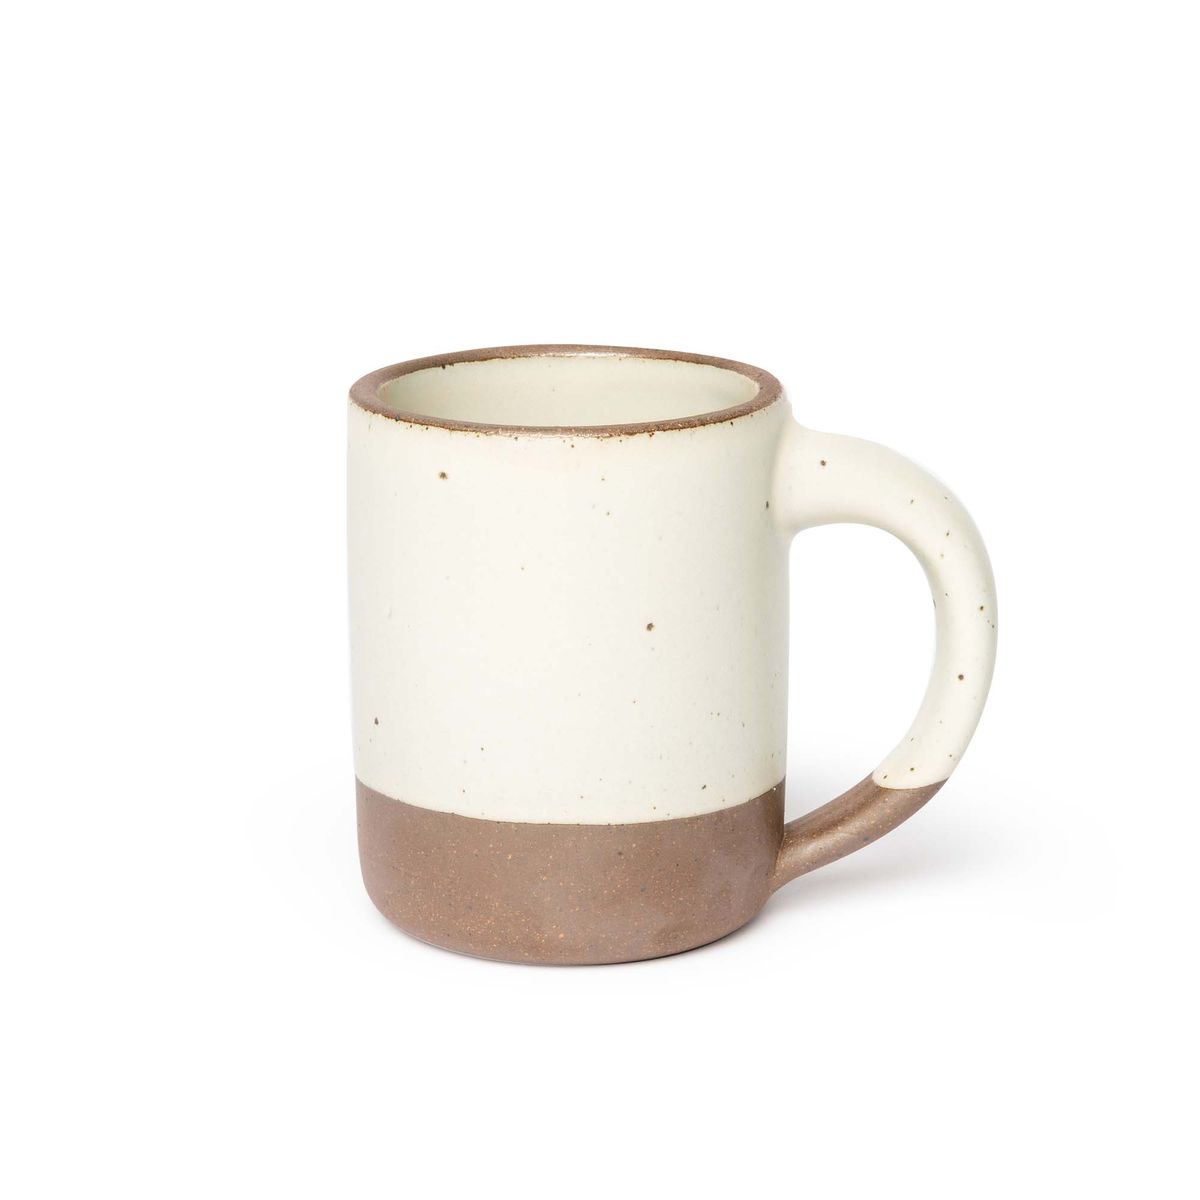 A big sized ceramic mug with handle in a warm, tan-toned, off-white glaze featuring iron speckles and unglazed rim and bottom base.